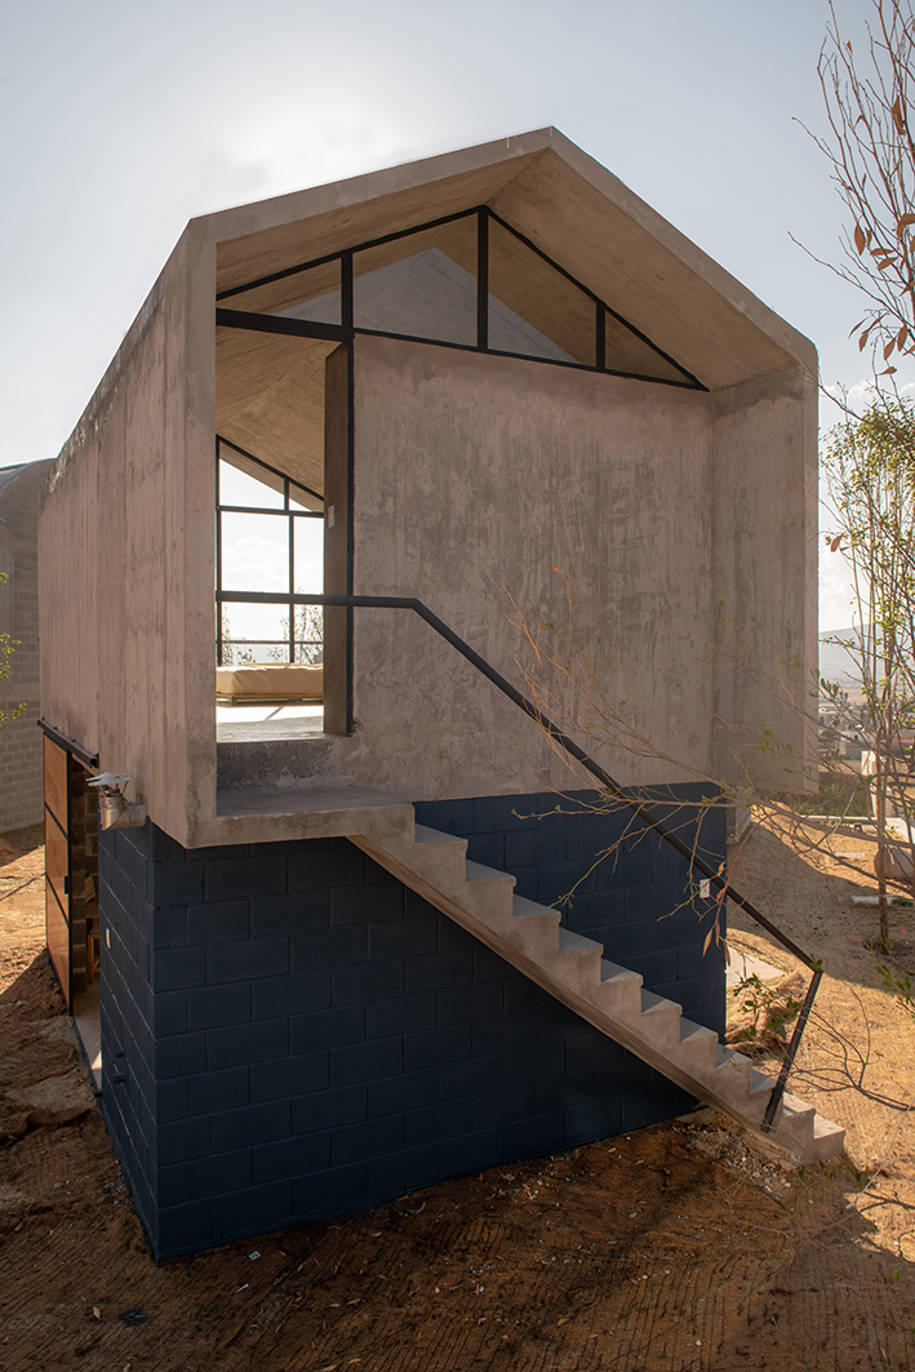 Archisearch Apan Prototype by Francisco Pardo Arquitecto : self-built social housing for rural Mexico